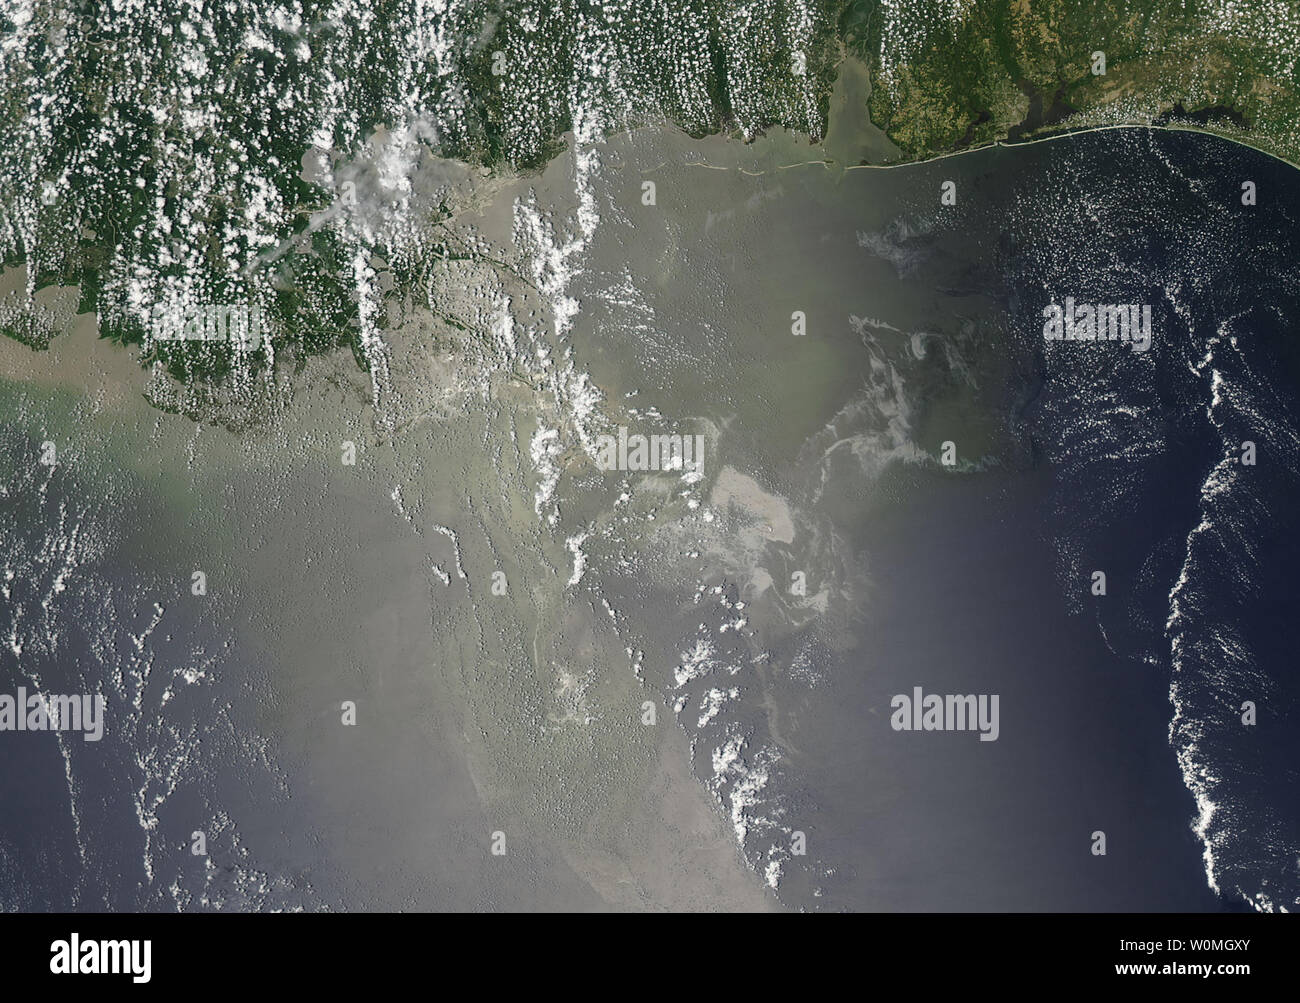 This Moderate Resolution Imaging Spectroradiometer (MODIS) image on NASA's Aqua satellite, taken on June 10, 2010, shows the oil slick off the Mississippi Delta over the Gulf of Mexico. The oil spill caused by BP's Deepwater Horizon oil rig explosion in April continues to leak oil into the Gulf. UPI/NASA Stock Photo